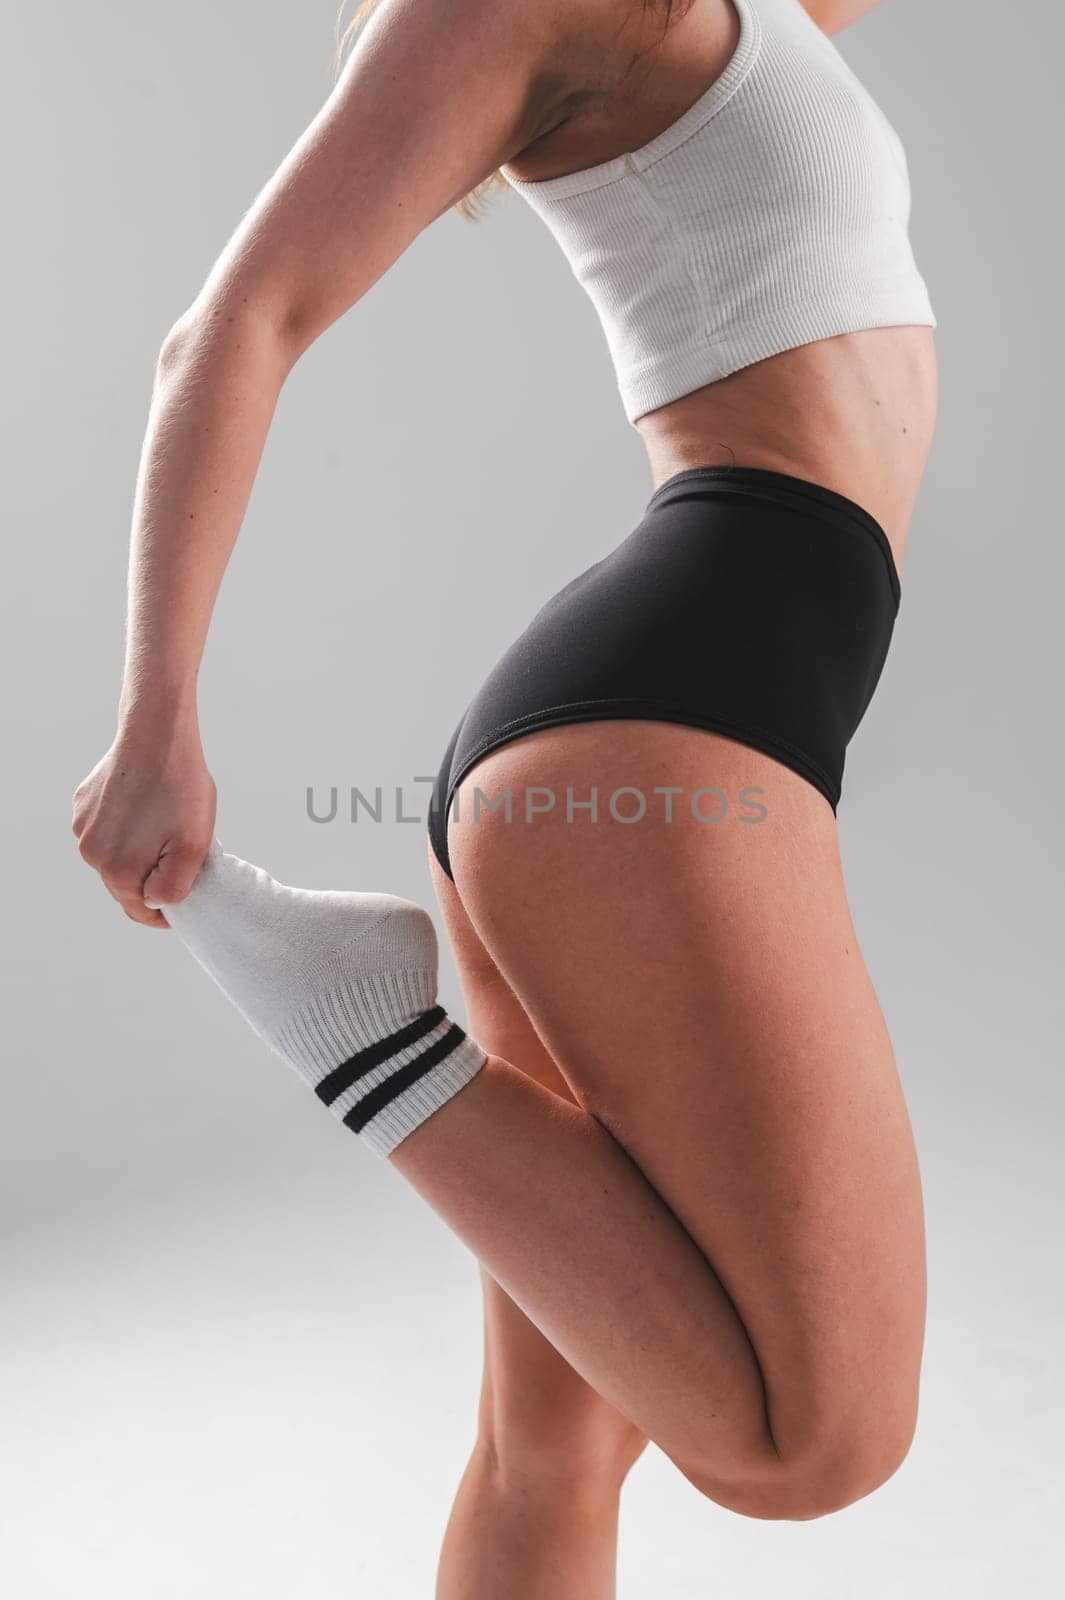 Faceless woman stretching her quadriceps on a white background. Vertical photo